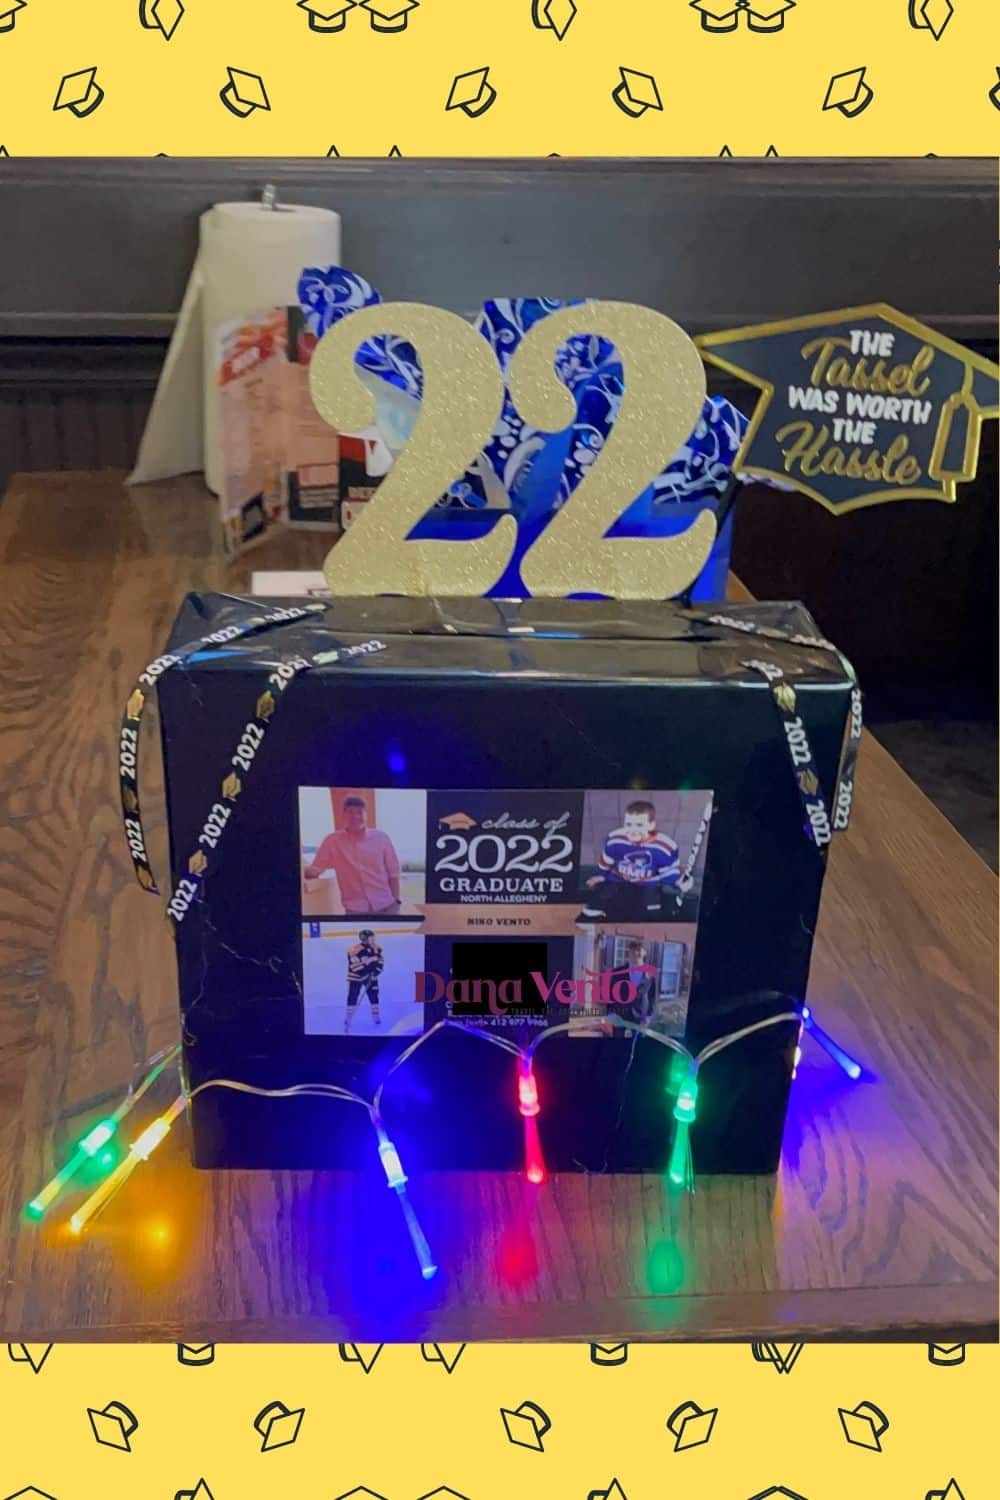 Money card box for graduation at the restaurant on table